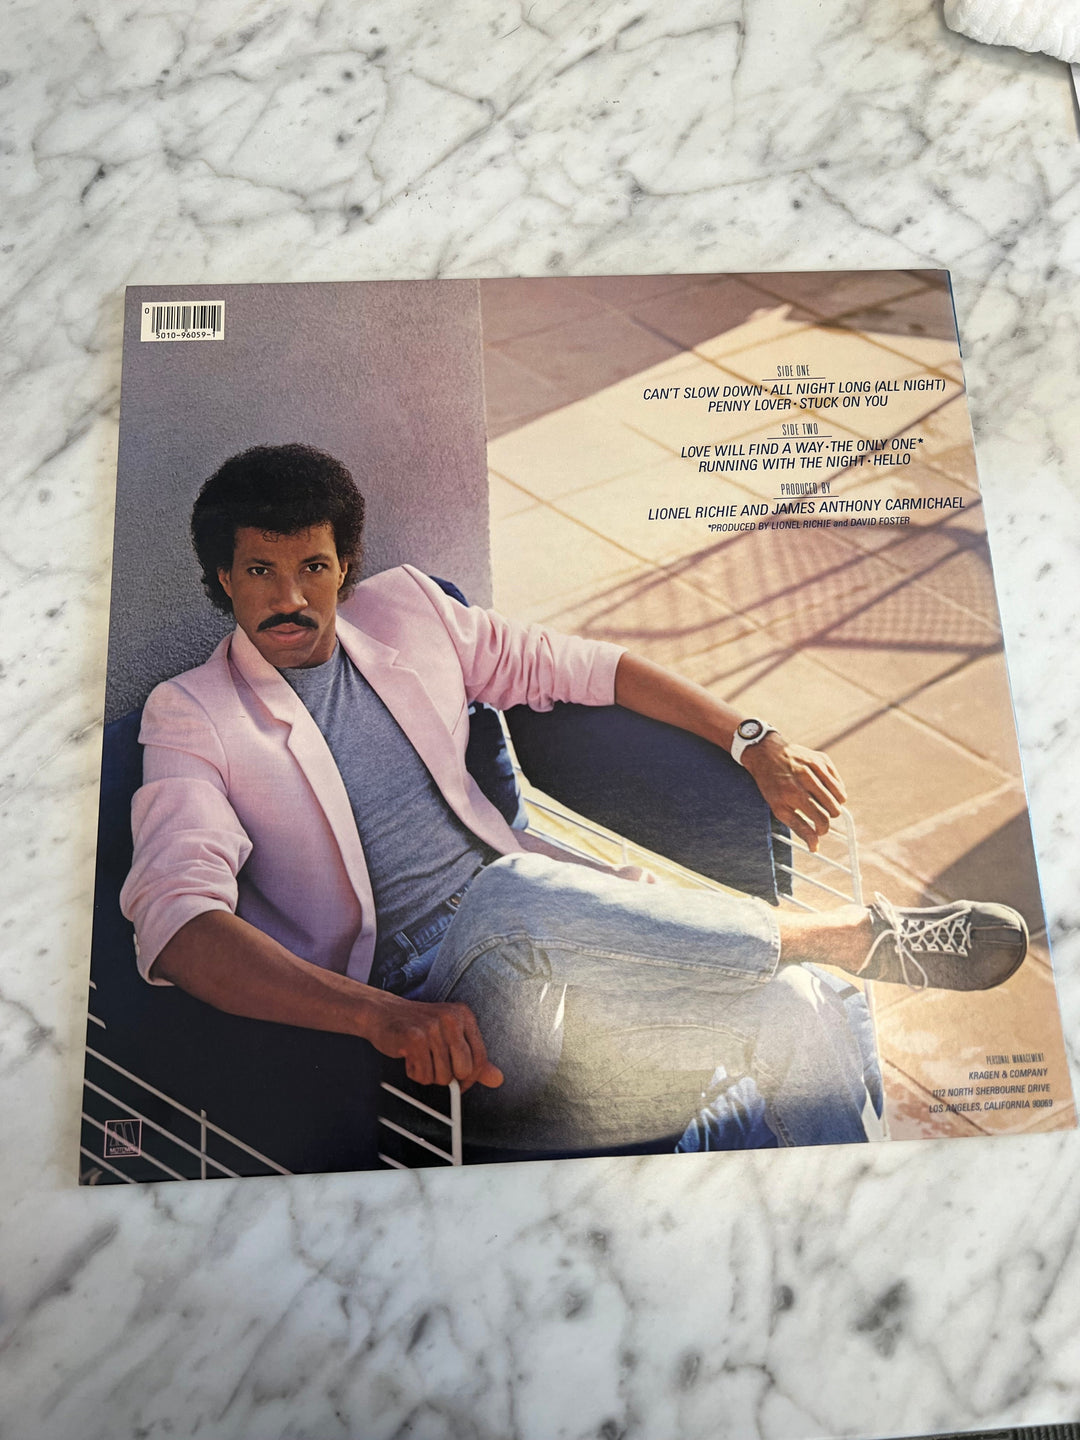 Lionel Richie - Can't Slow Down Vinyl Record 6059MLB15